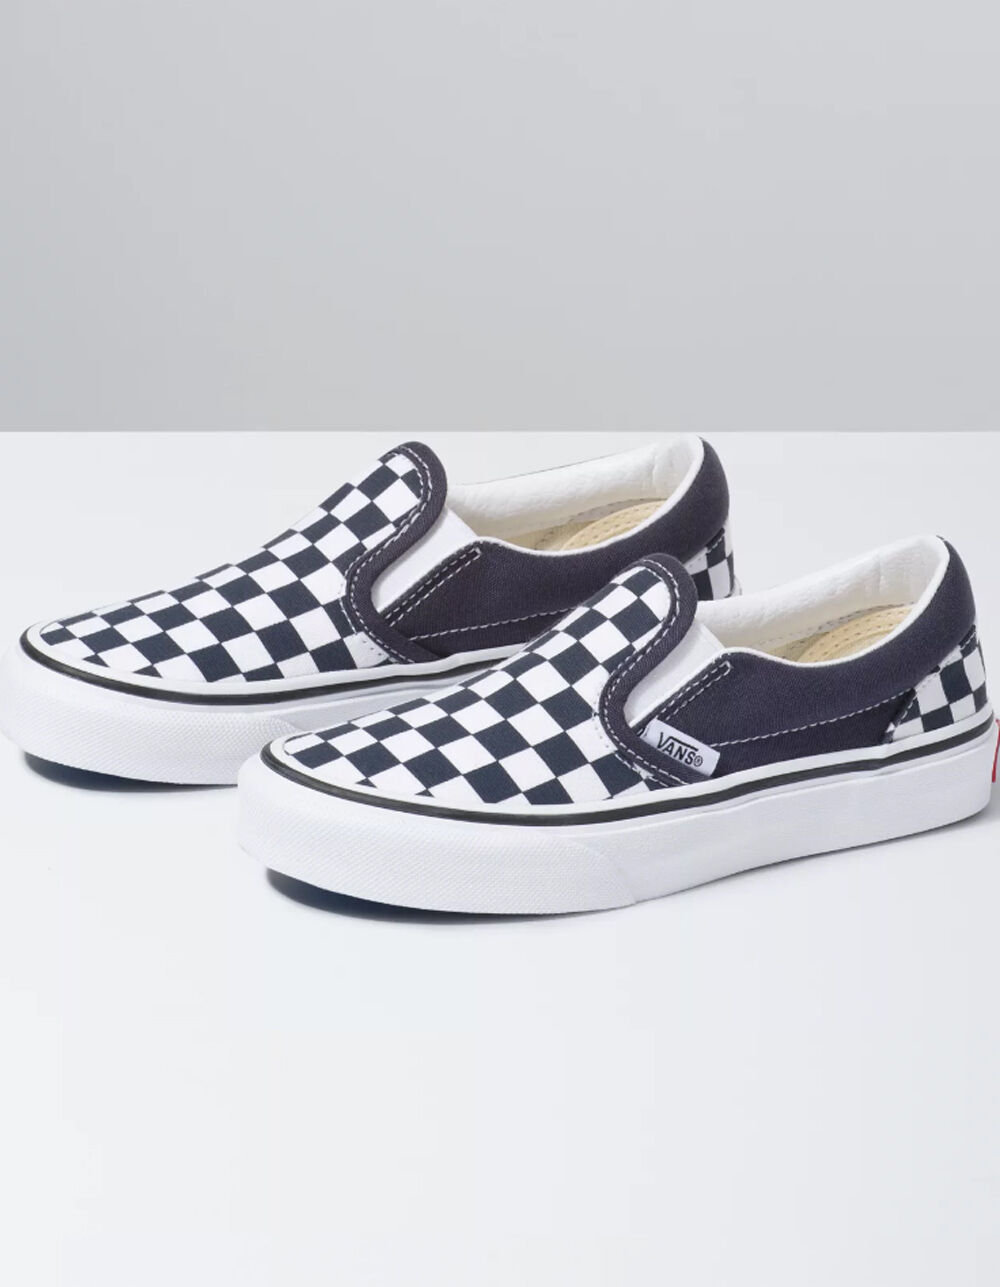 VANS Checkerboard Classic Slip-On Girls Shoes - INDIA INK/TRUE WHITE ...